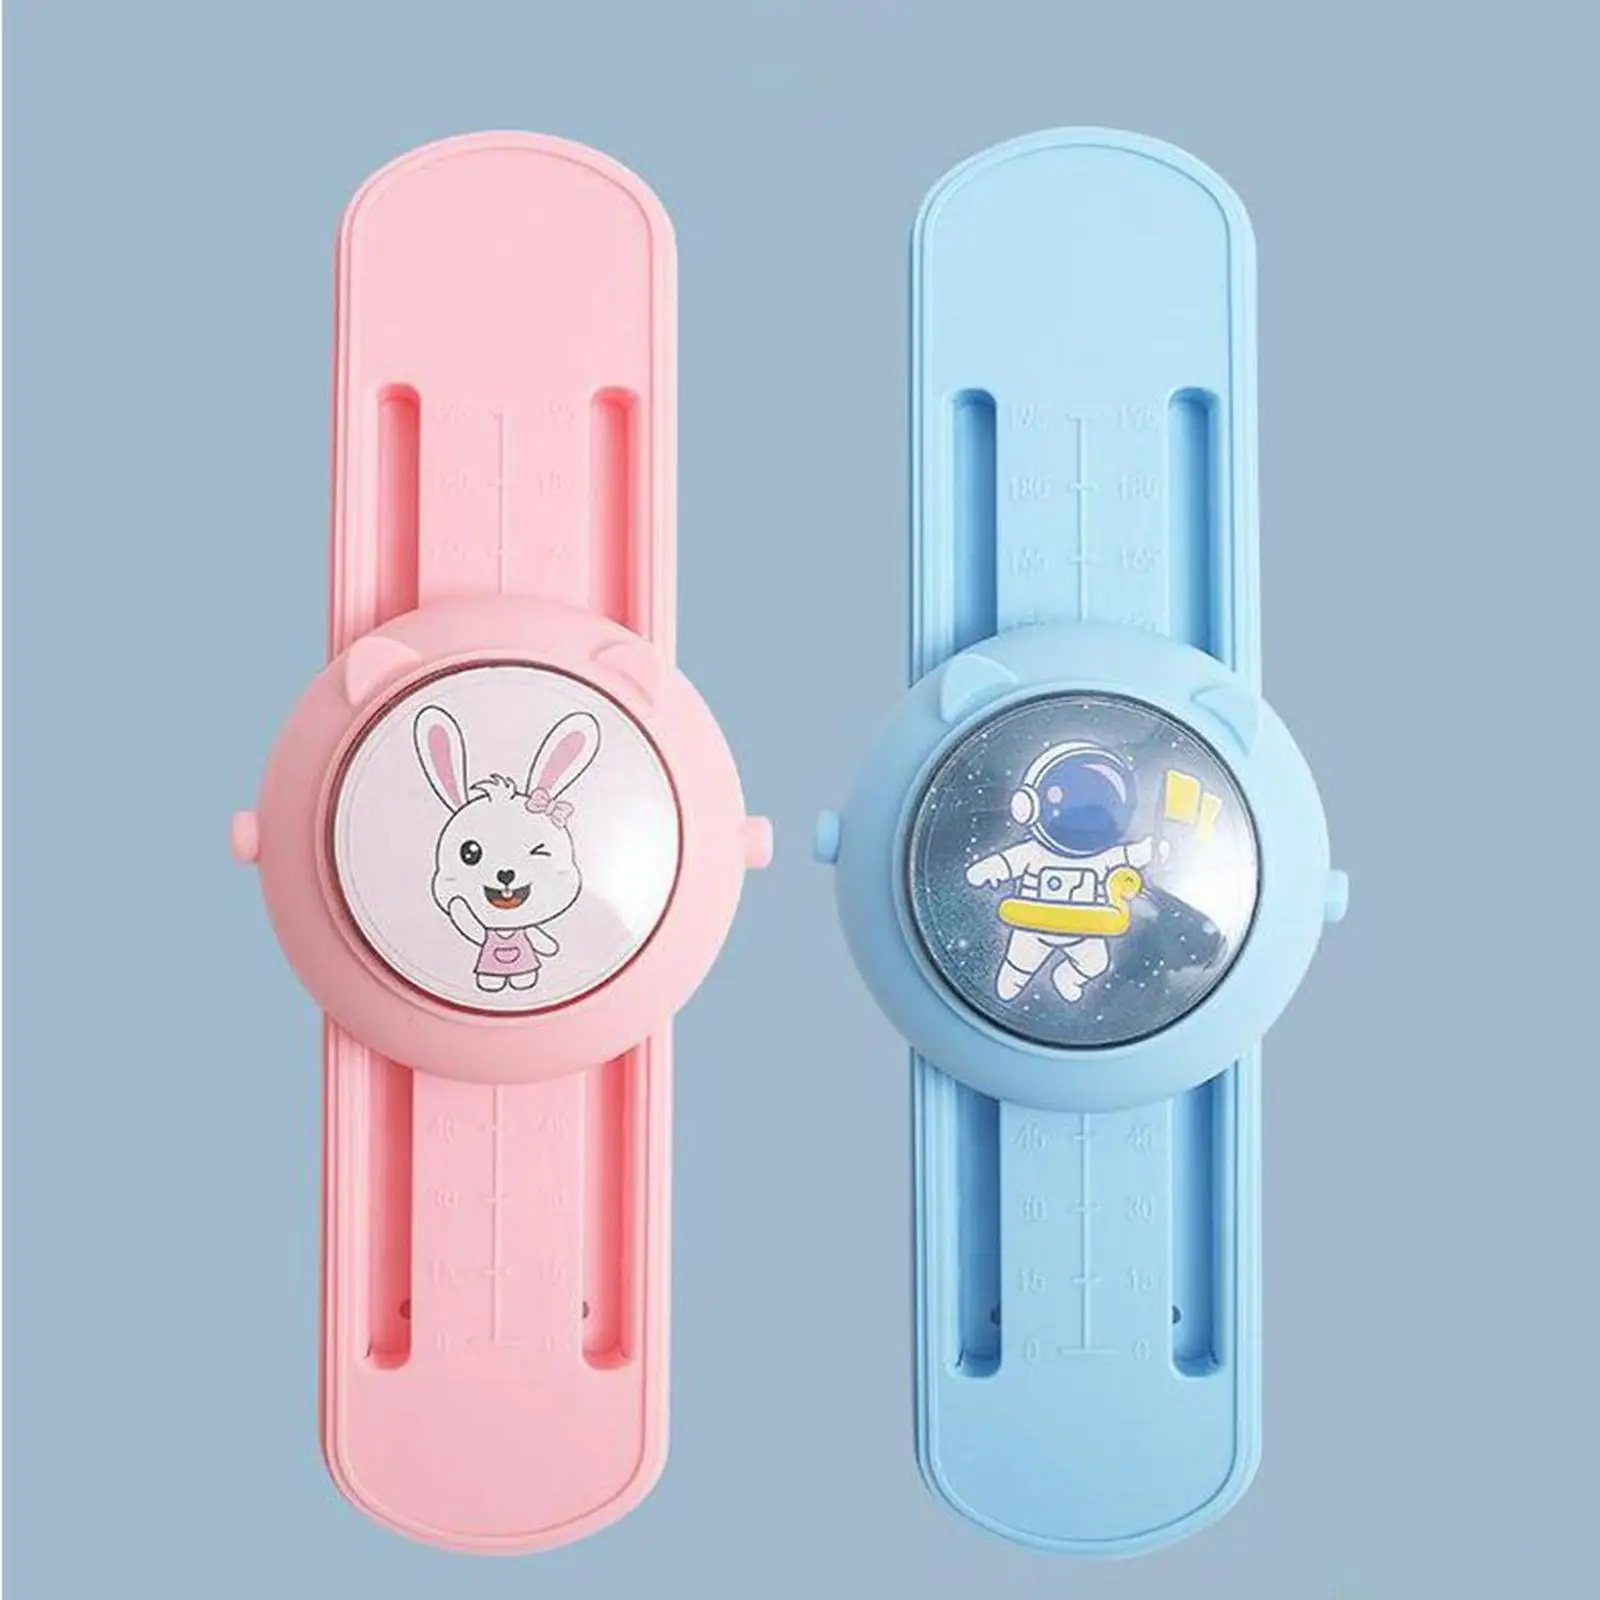 Touch Jump Counter Wall Mounted Voice Report Height Touch Device Interactive Toy Gifts Jump Trainer for Indoor Girls Boys